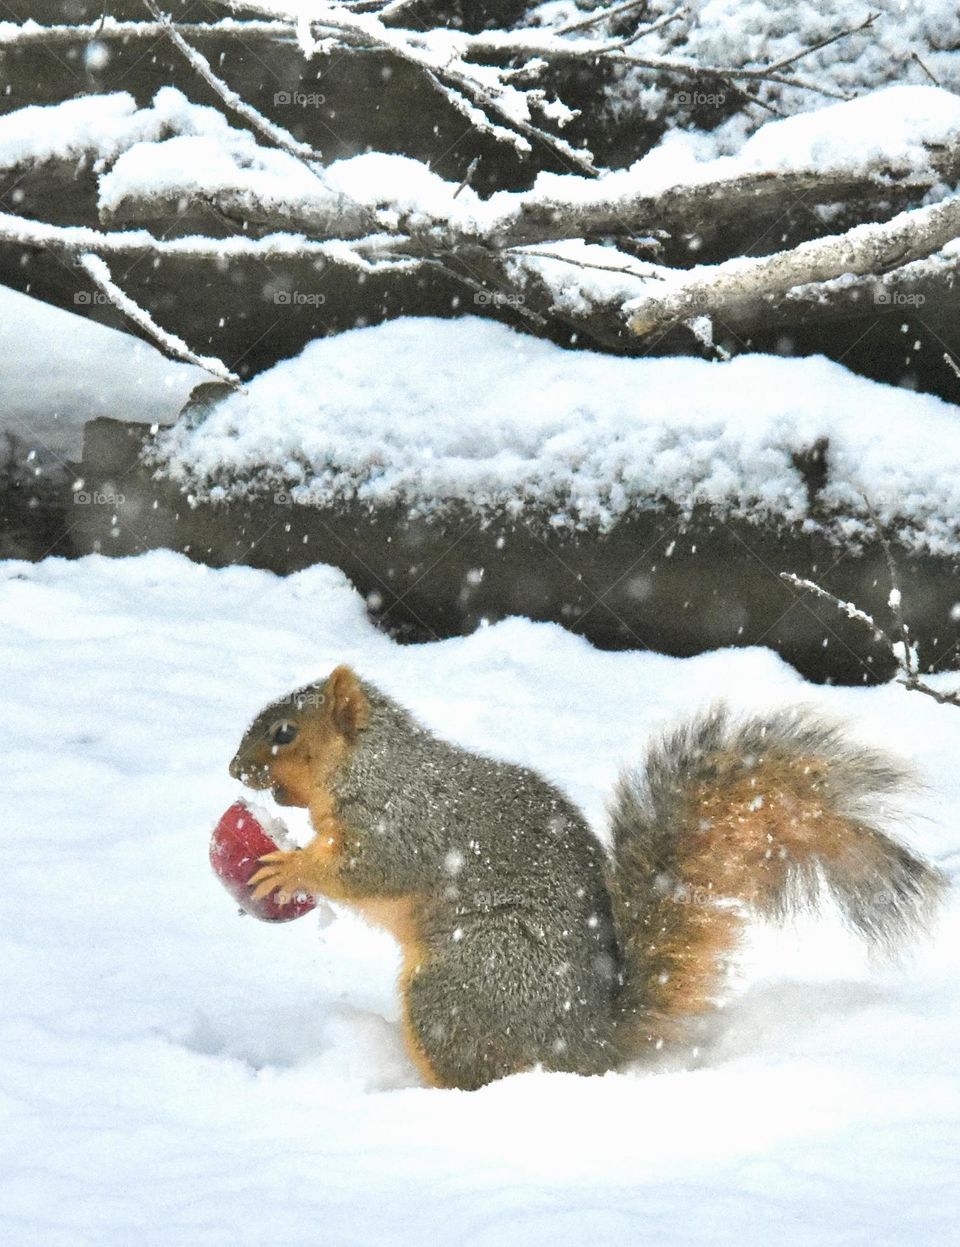 Squirrel holding half an apple in the snow